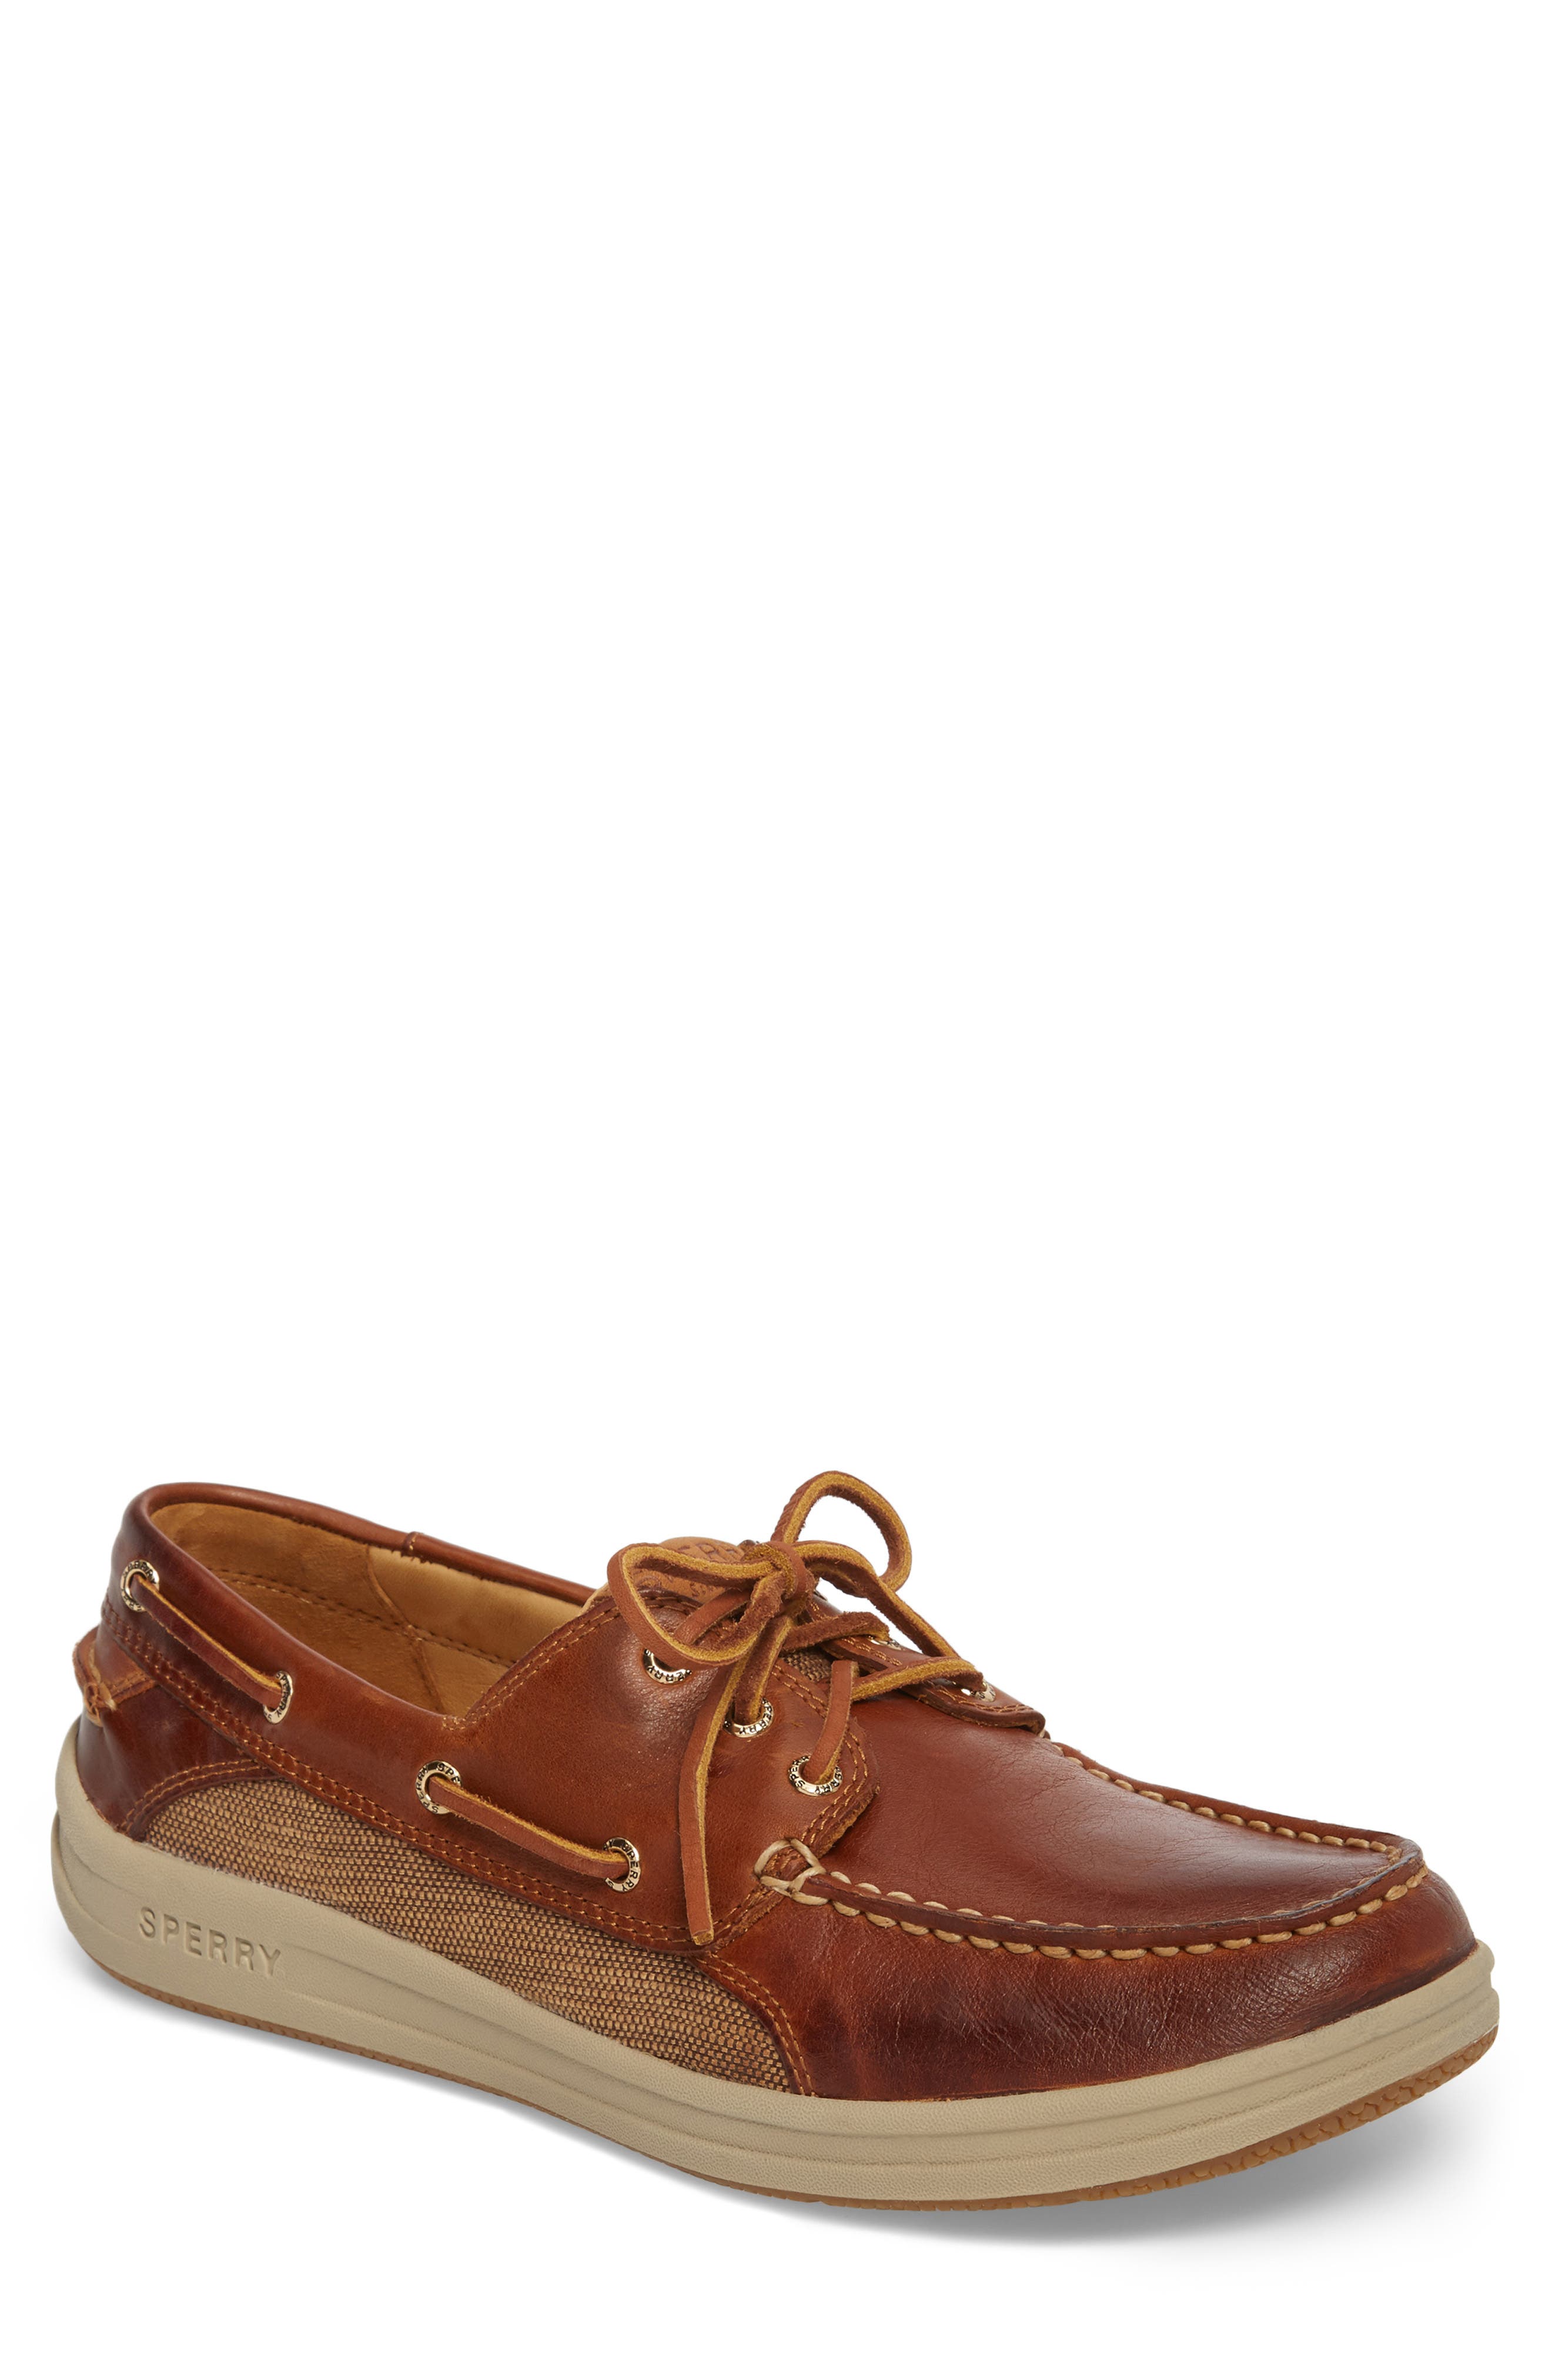 Sperry | Gold Cup Gamefish Boat Shoe 